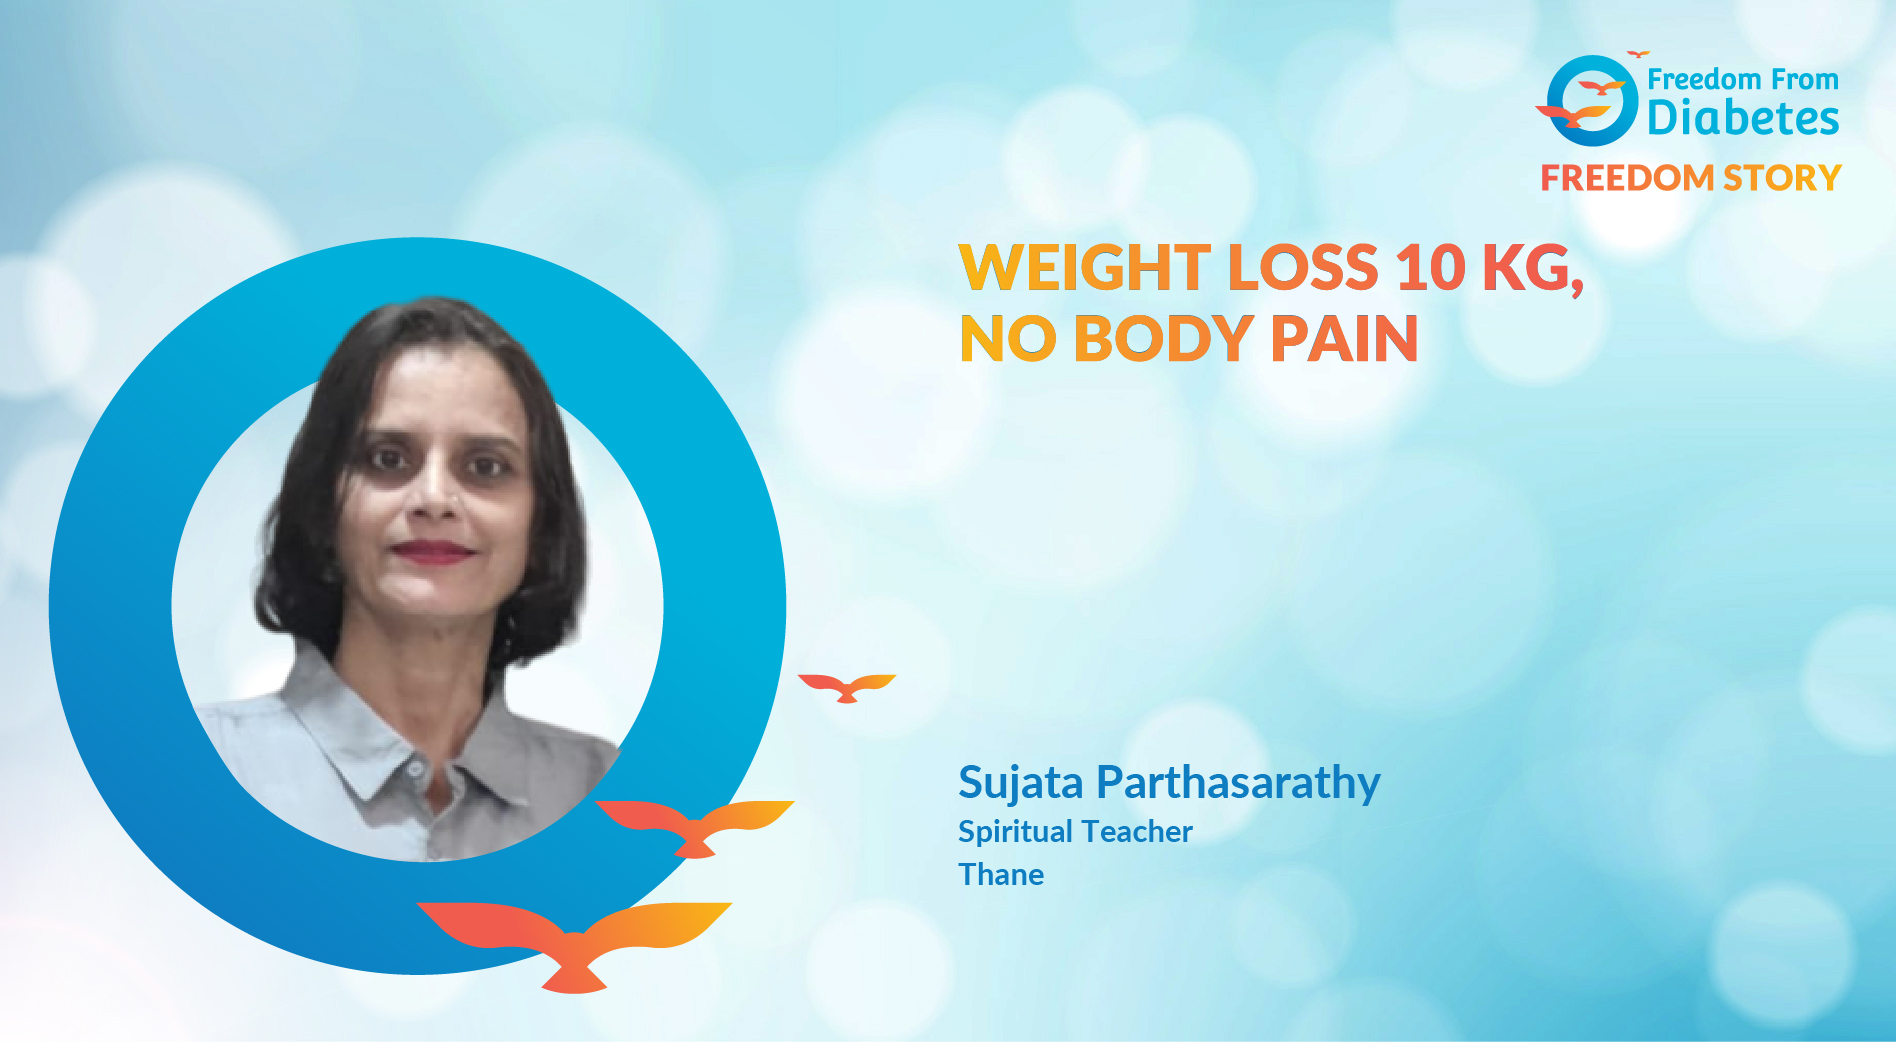 Sujata Parthasarathy: A superb weight loss story from Thane